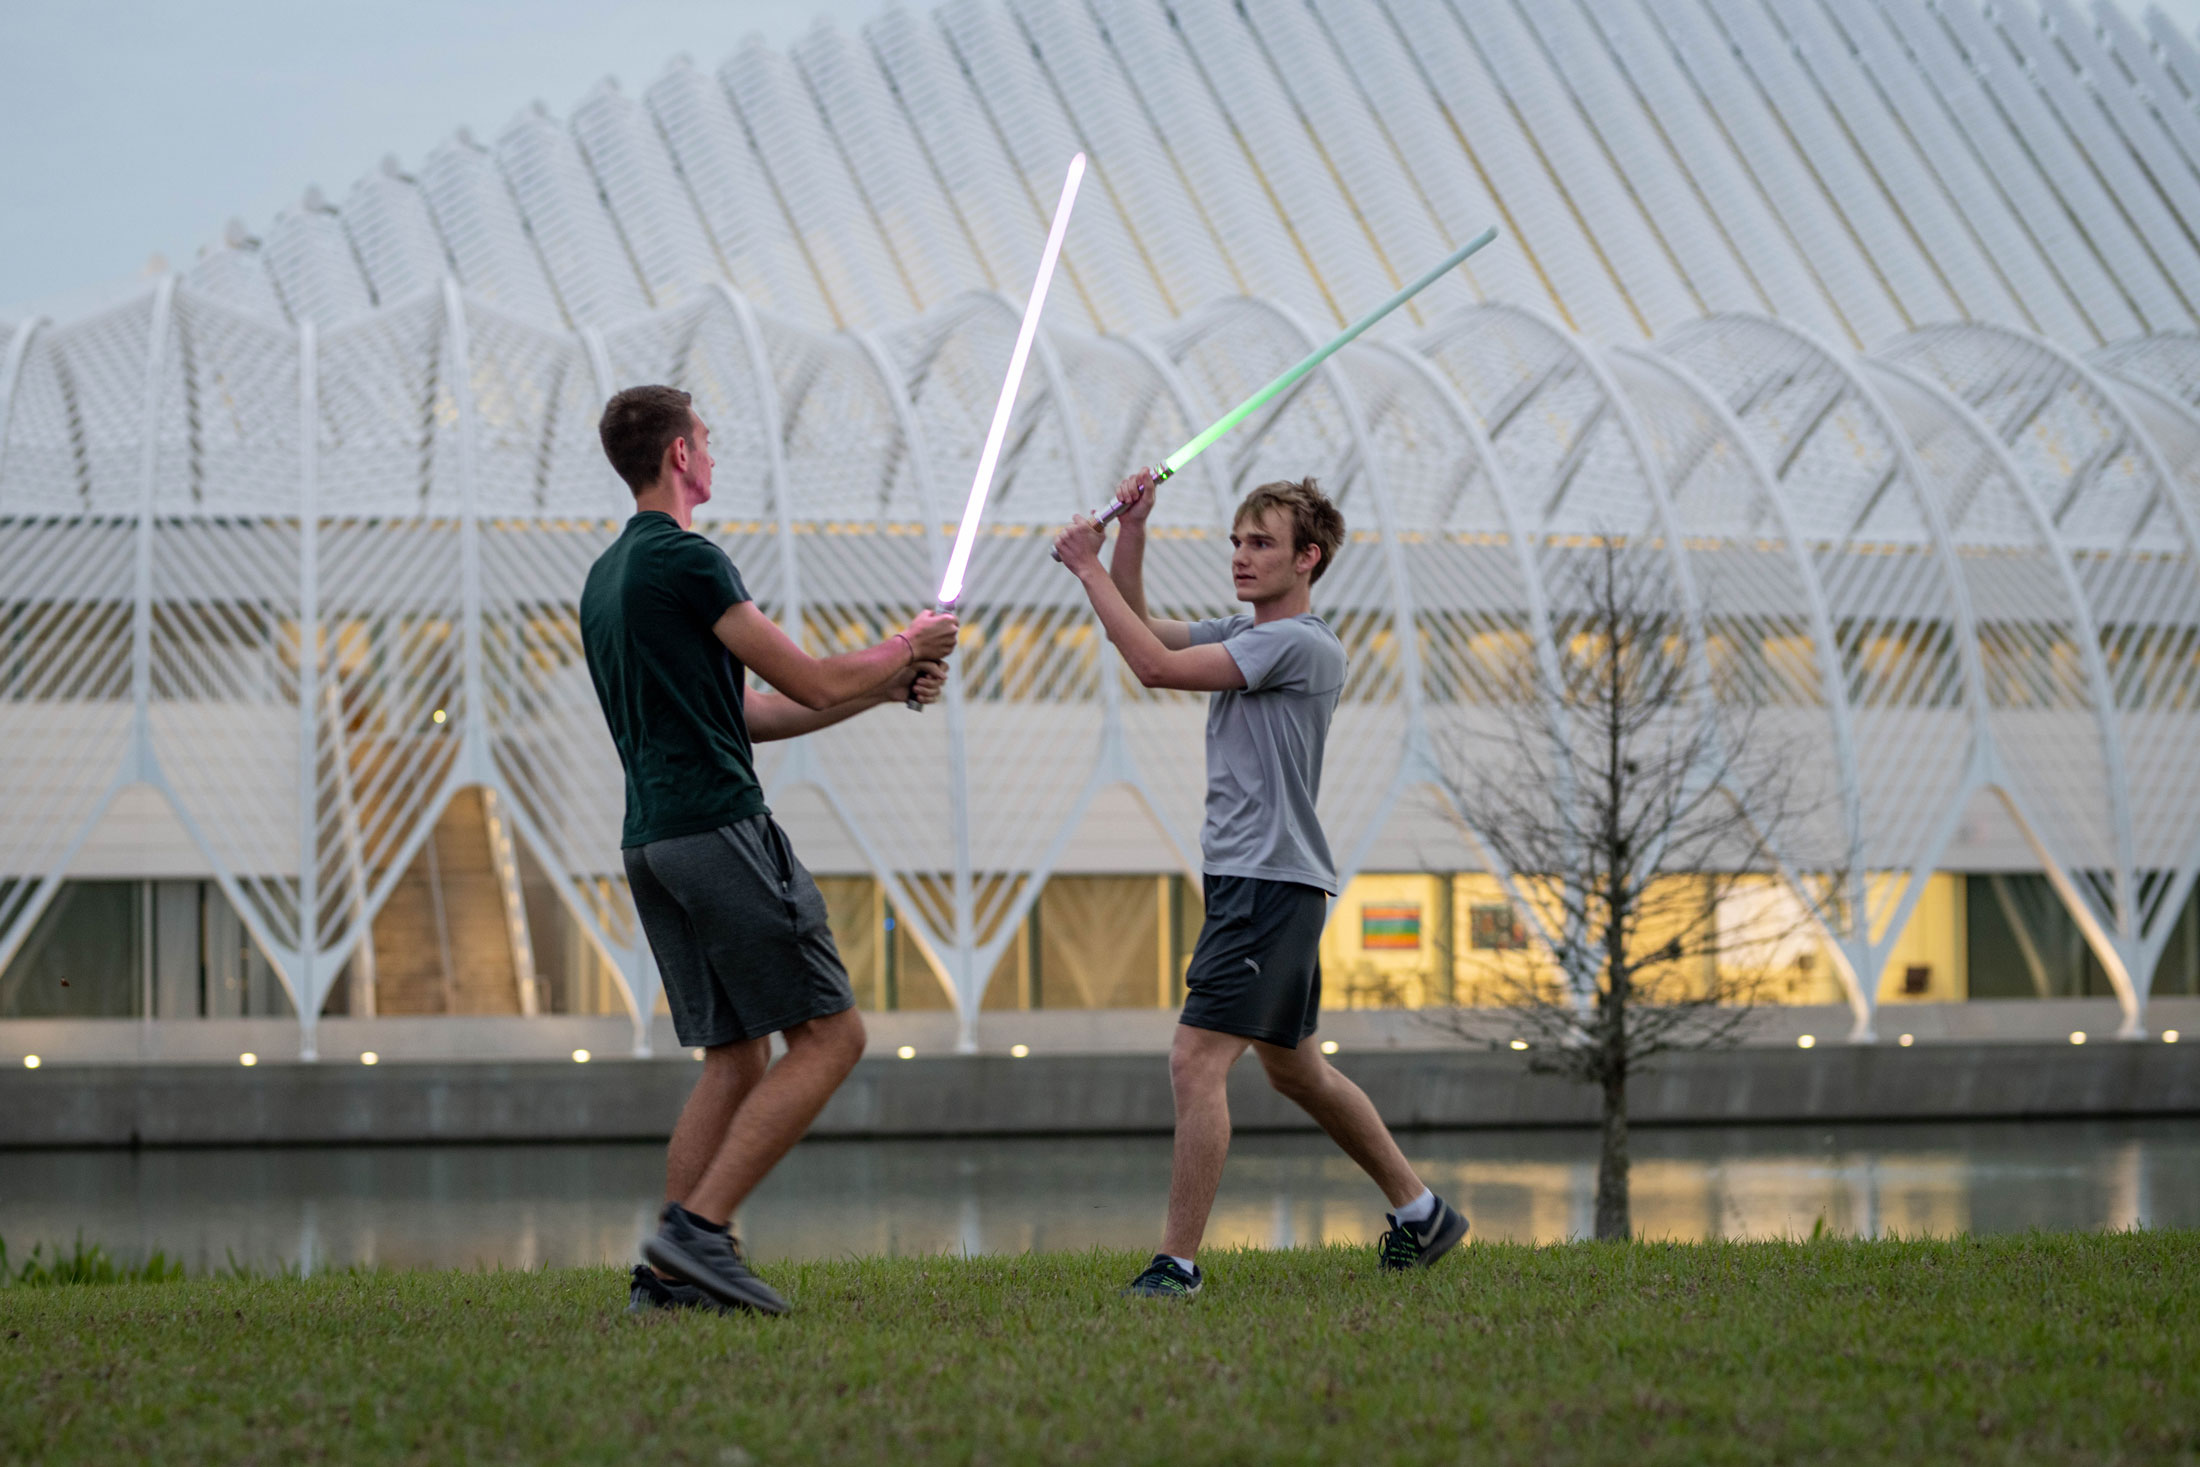 Members of the Force Institute train with lightsabers.